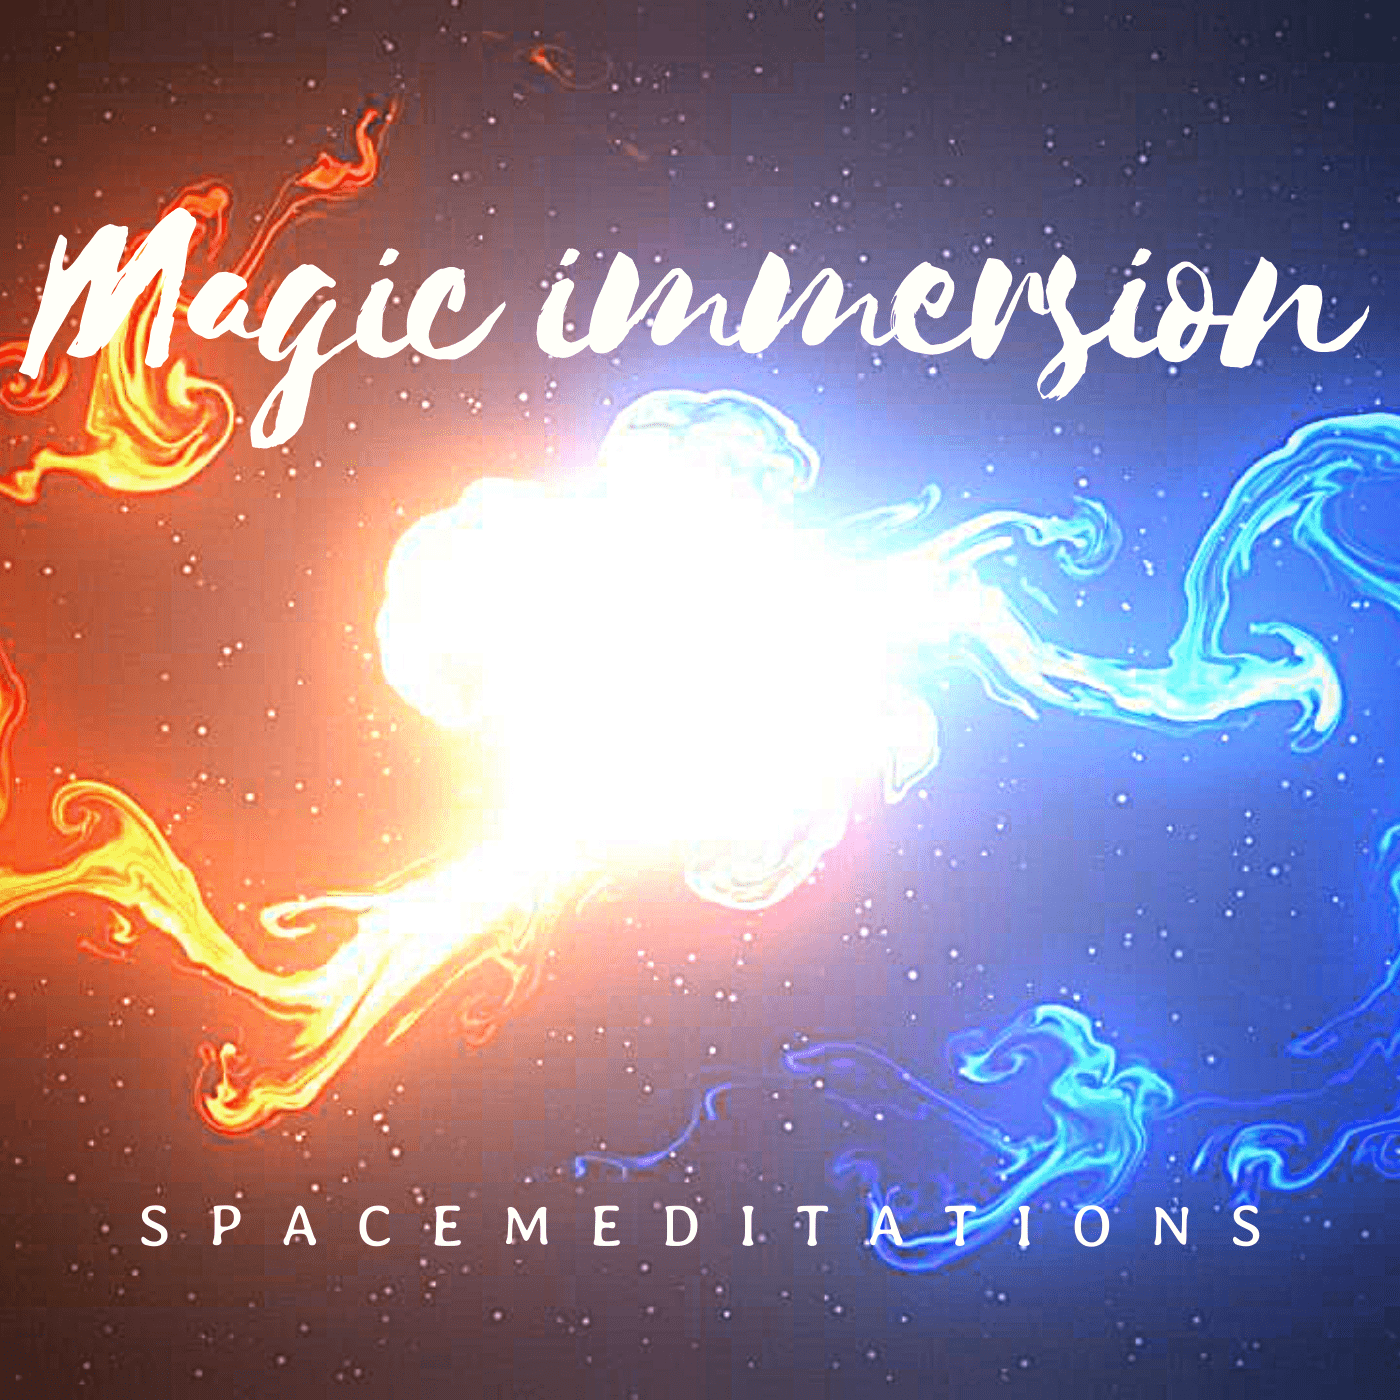 Magic immersion. Spacemeditations